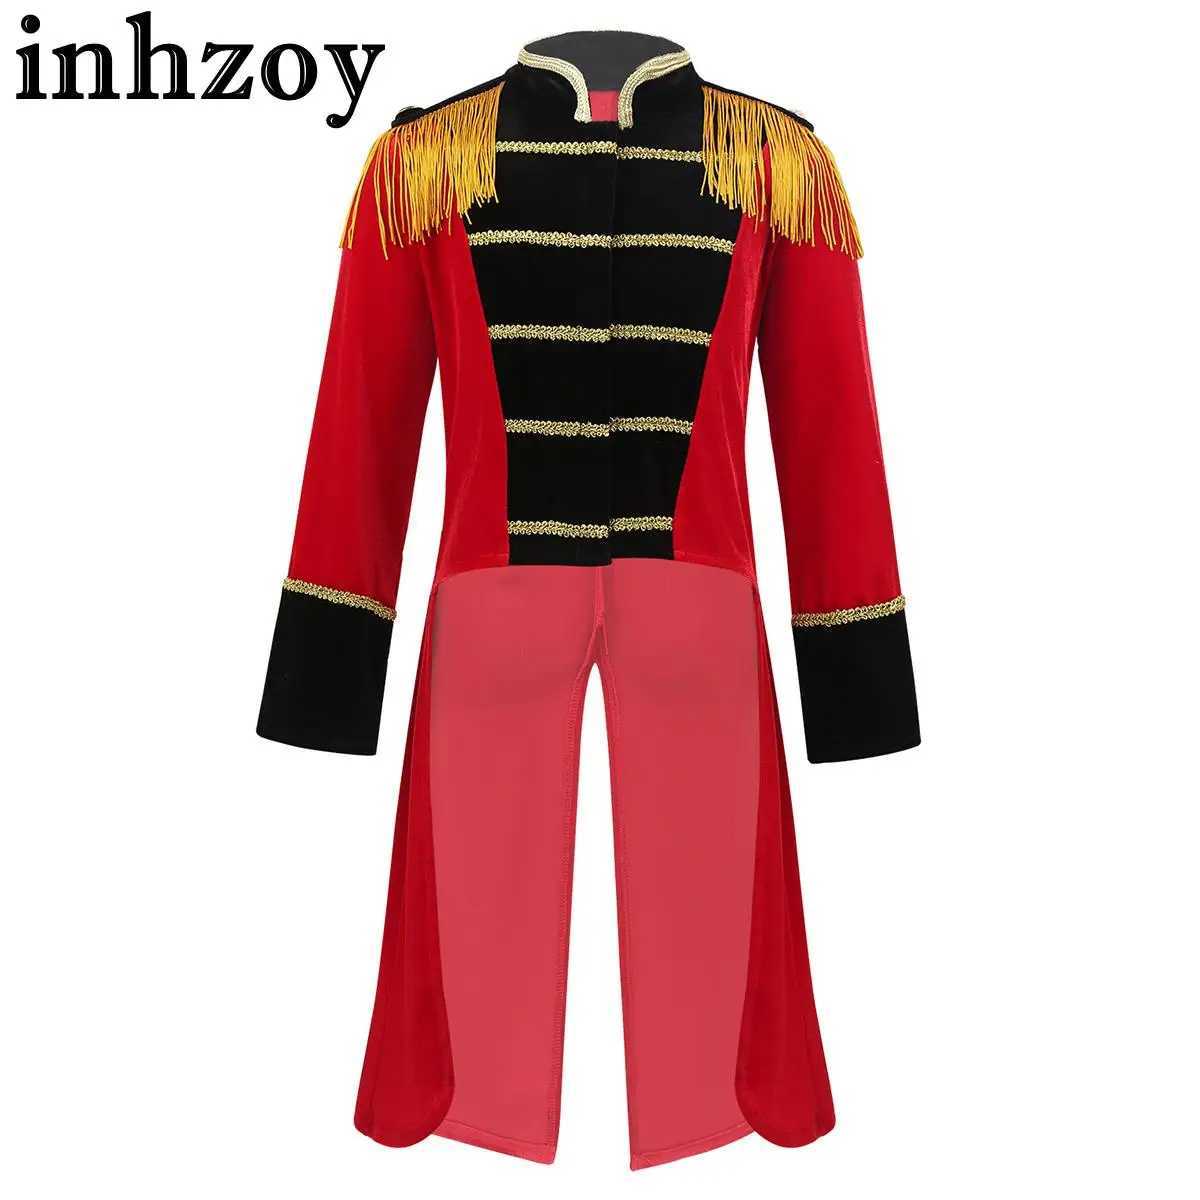 Cosplay Kids Boys Circus Ringmaster Costume Halloween Cosplay Party Party Fringe Gold Trimmings Talcoat Jacket Tops for Performancel2405